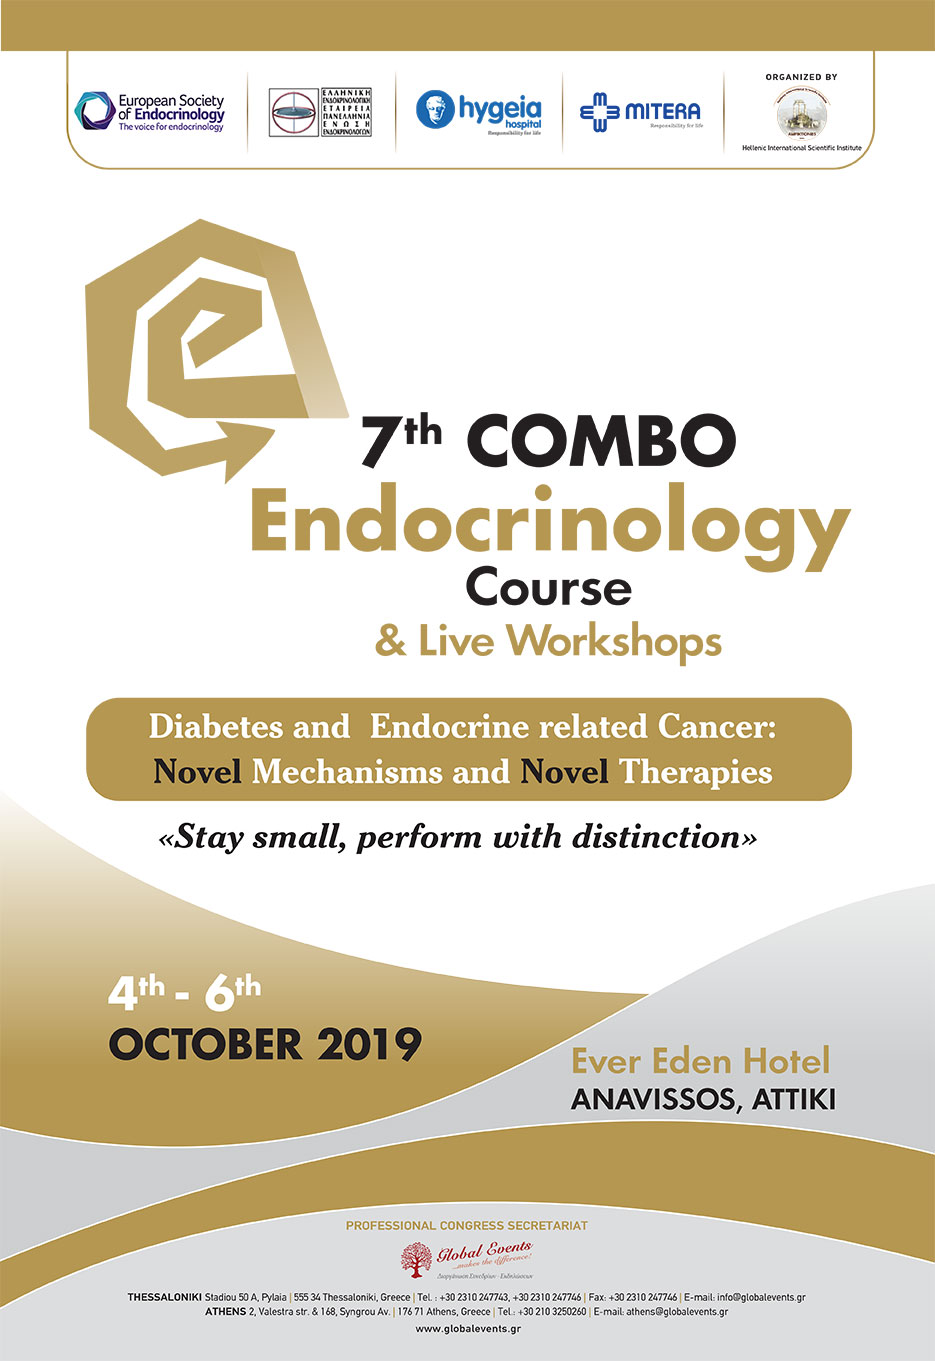 7th Combo Endocrinology Course & Live Workshops